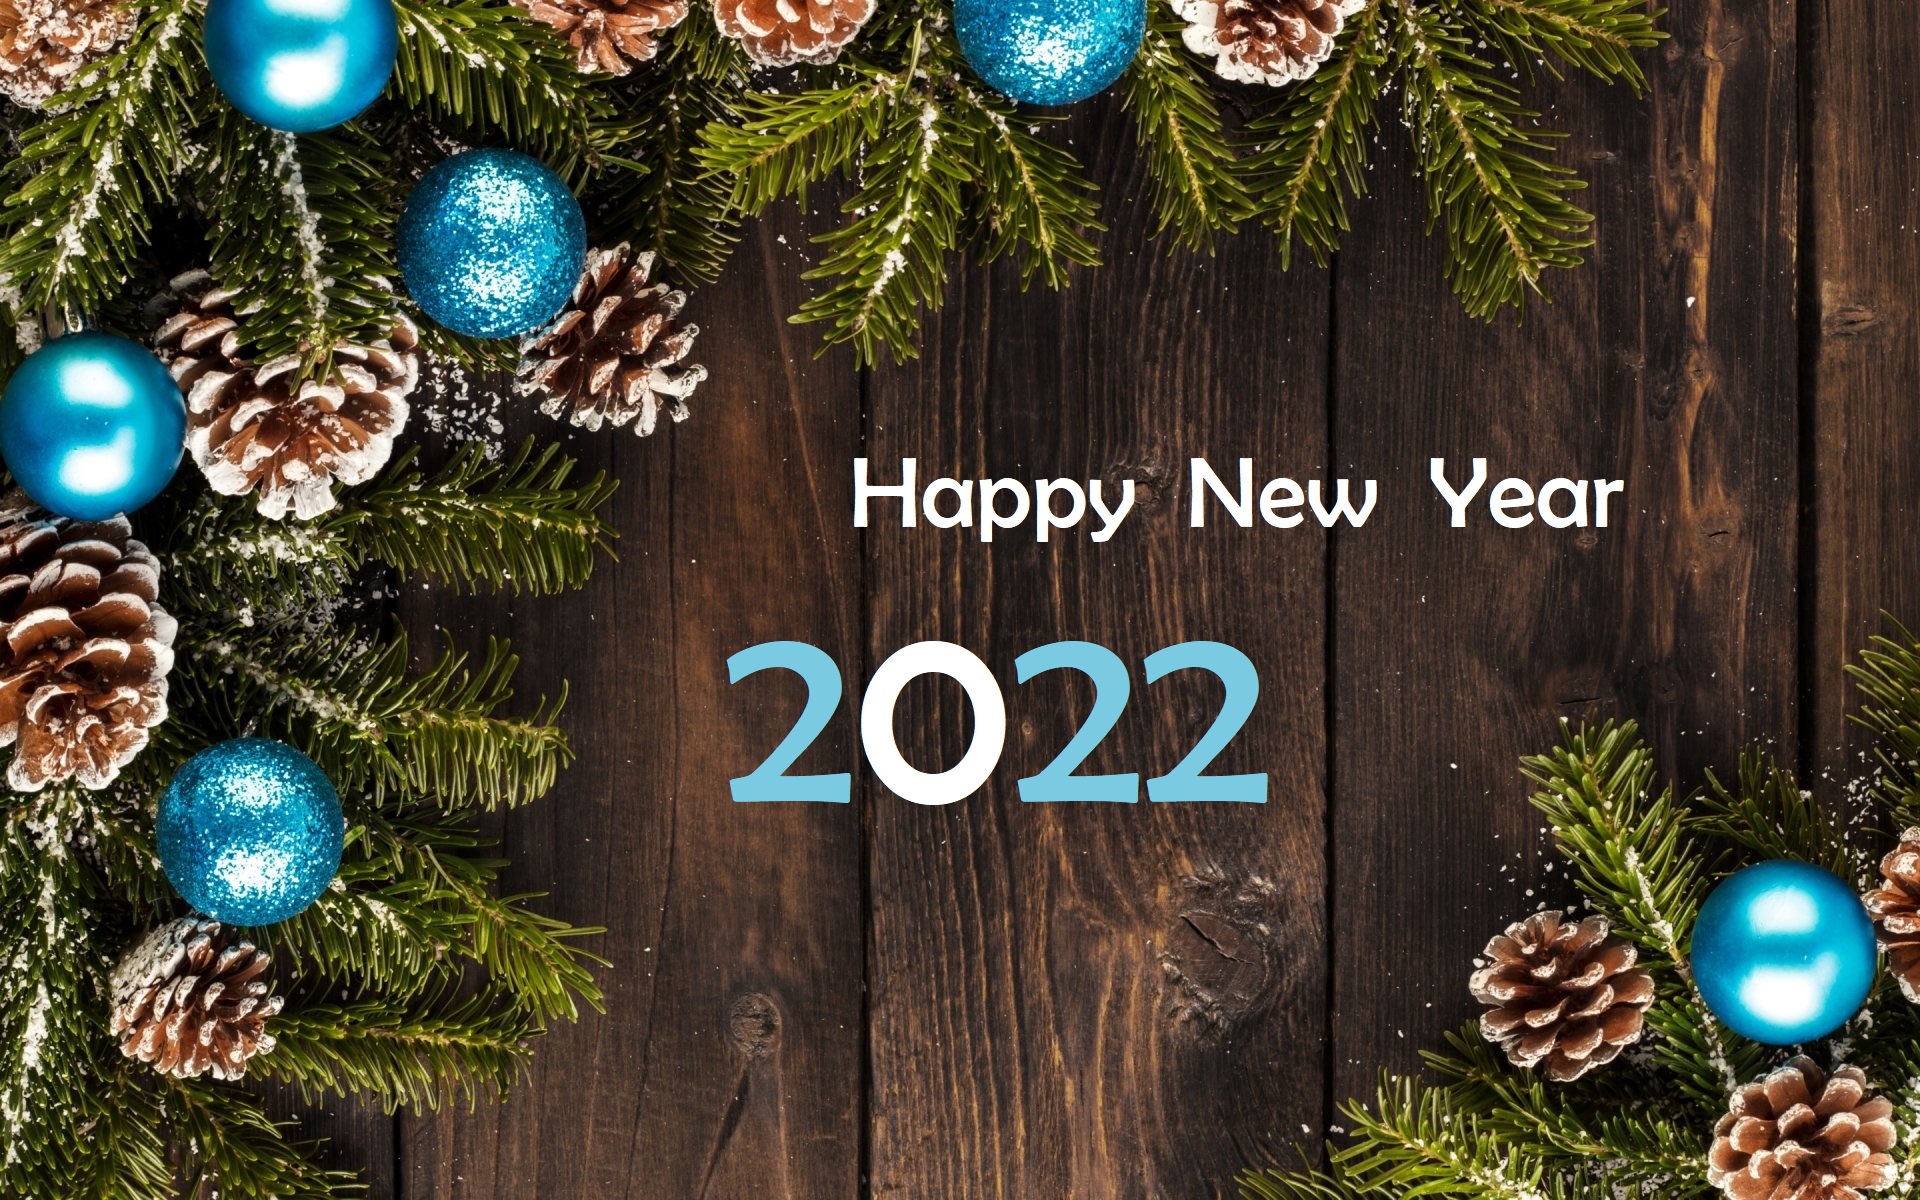 holiday, new year 2022, christmas ornaments, happy new year phone background